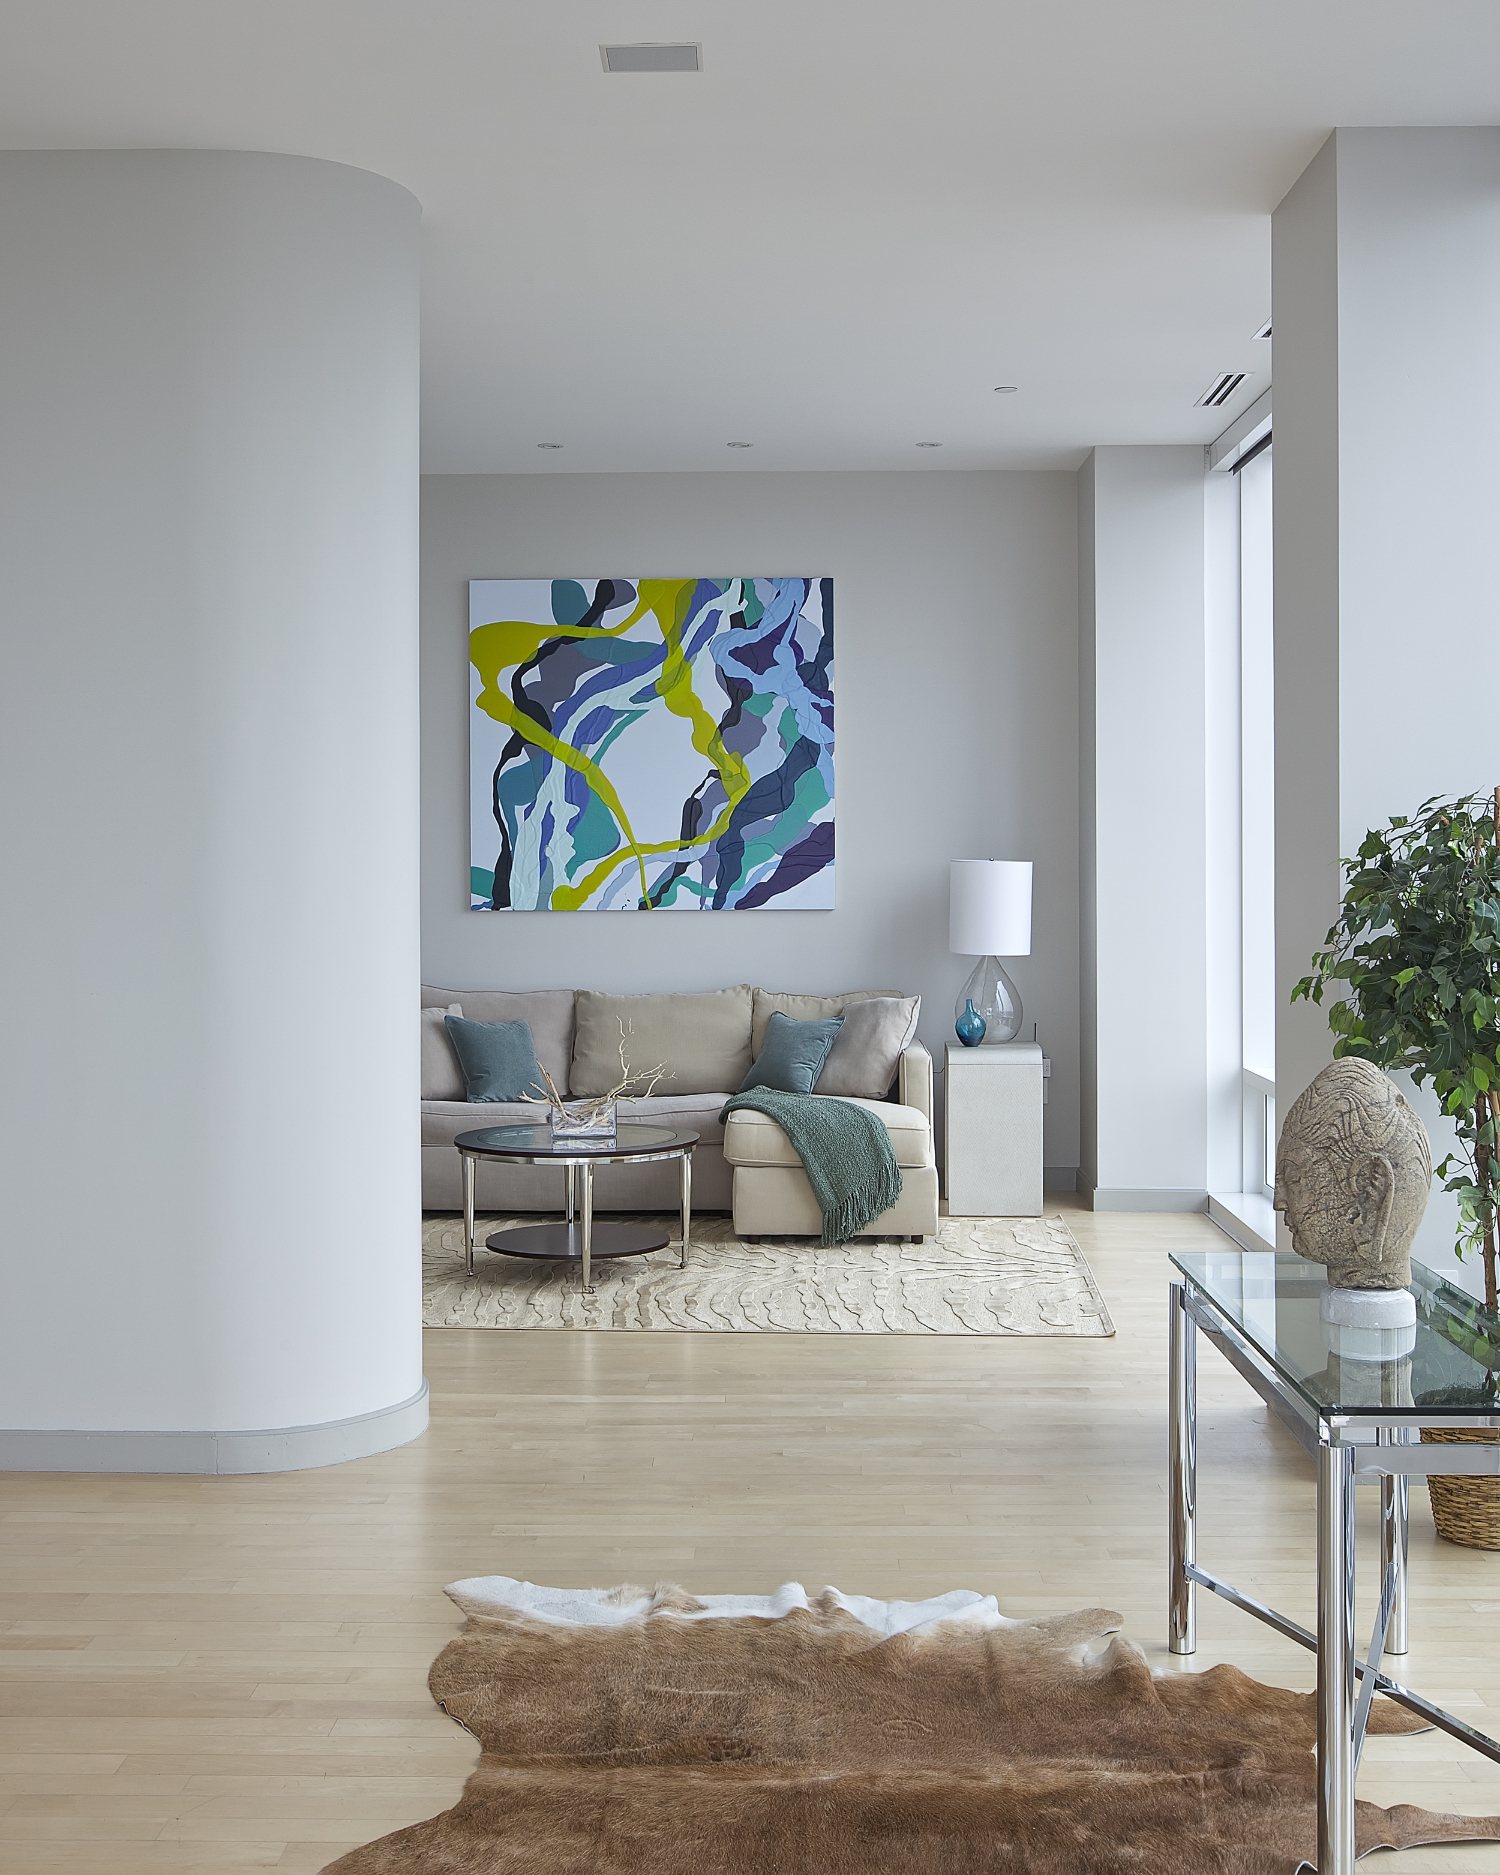  CHELSEA PENTHOUSE DUPLEX   A peaceful foyer with a Buddha sculpture on a glass table gives a glimpse of a cozy living room. The animal skin rug and a plant give natural vibes as you walk through the foyer. A glass wall allows a considerable amount o